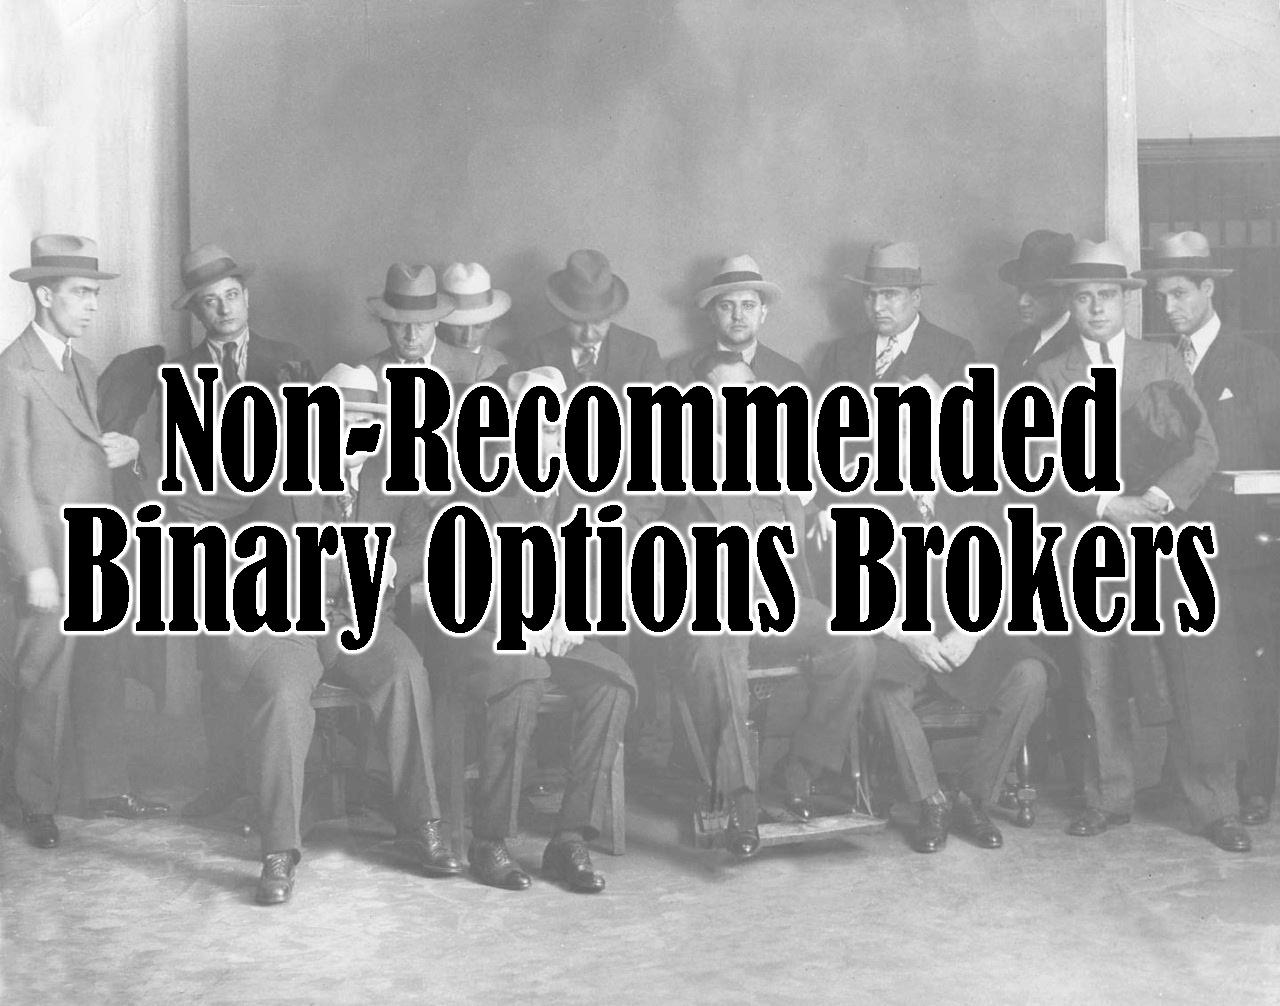 Recommended binary options brokers